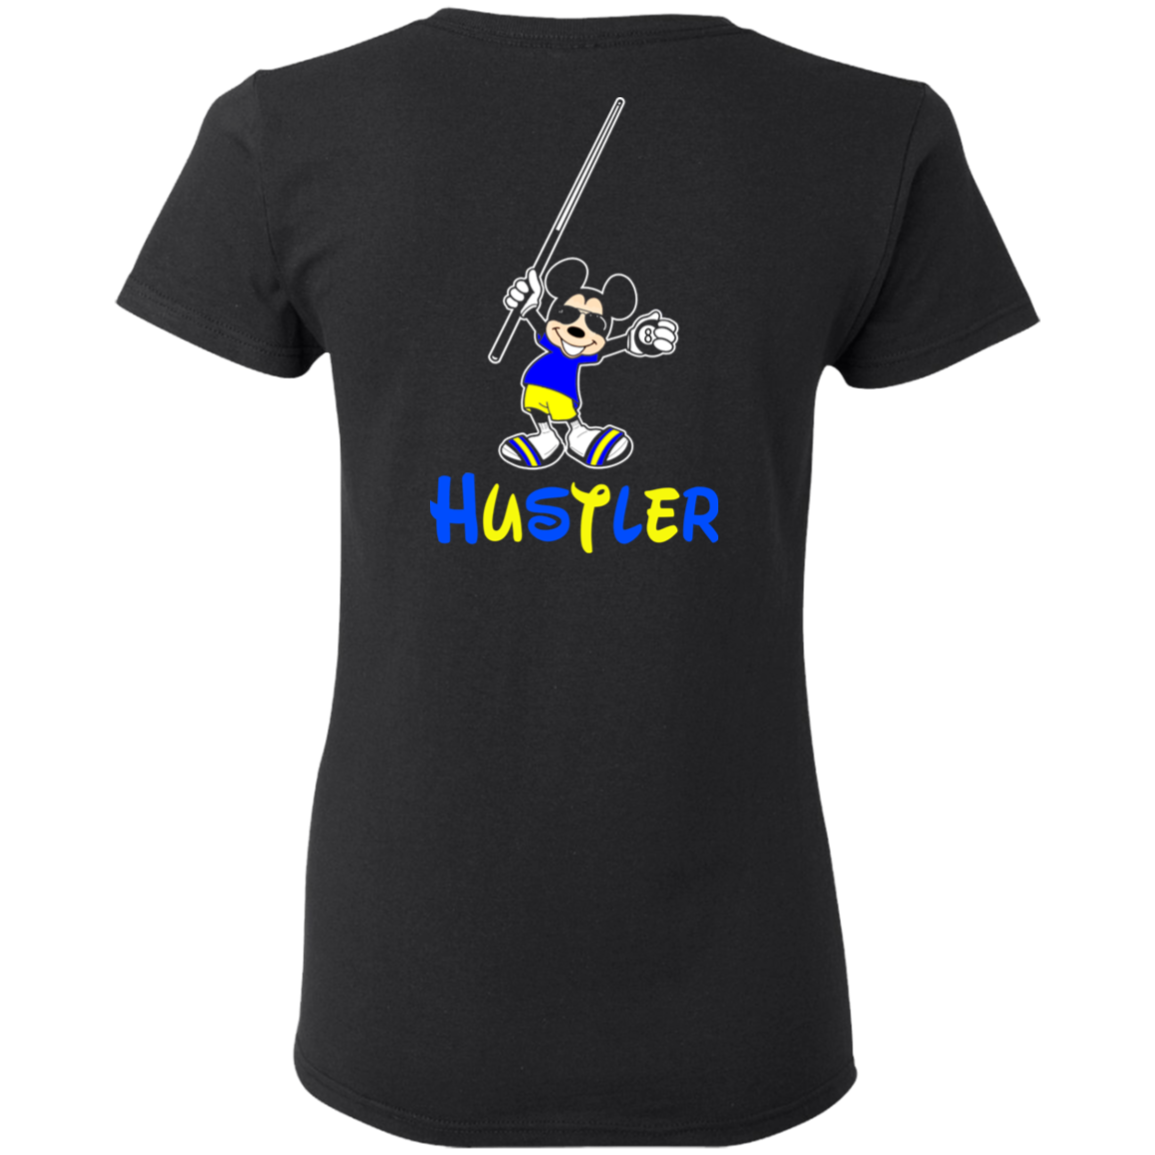 The GHOATS Custom Design #20. Look at the back. Hustle Mouse. Mickey Mouse Fan Art. Ladies' Basic 100% Cotton T-Shirt